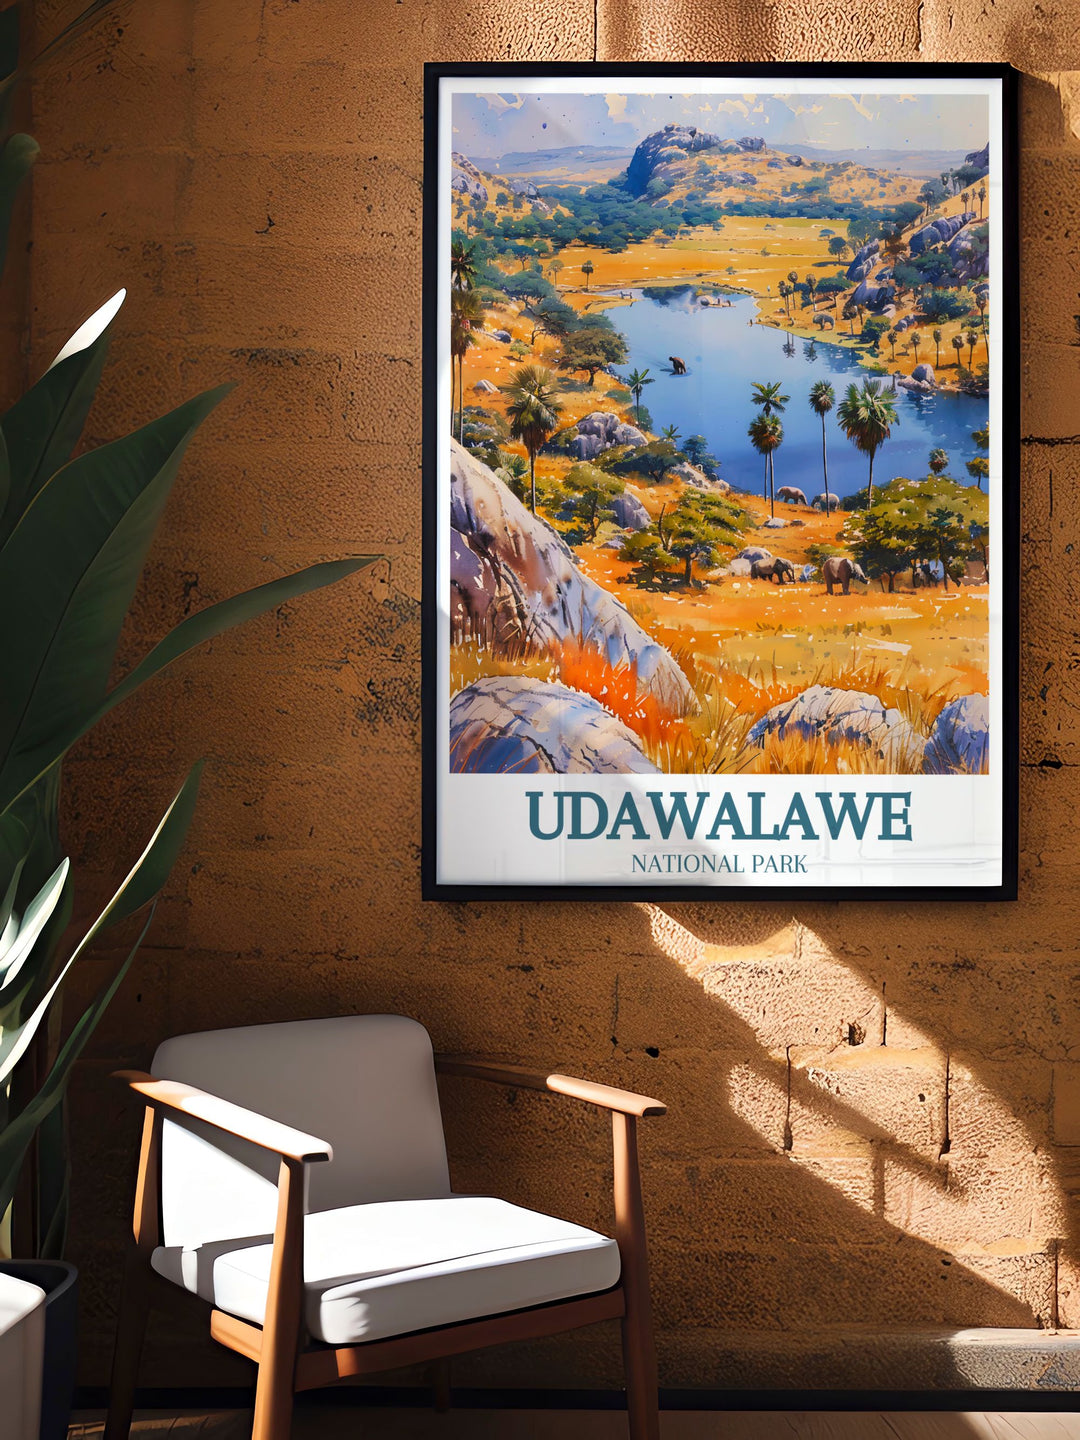 Unique Sri Lanka gift featuring Udawalawe Reservoir Walawe River wall art a captivating piece that celebrates the natural beauty and tranquility of Sri Lanka making it an ideal gift for birthdays anniversaries or special occasions.